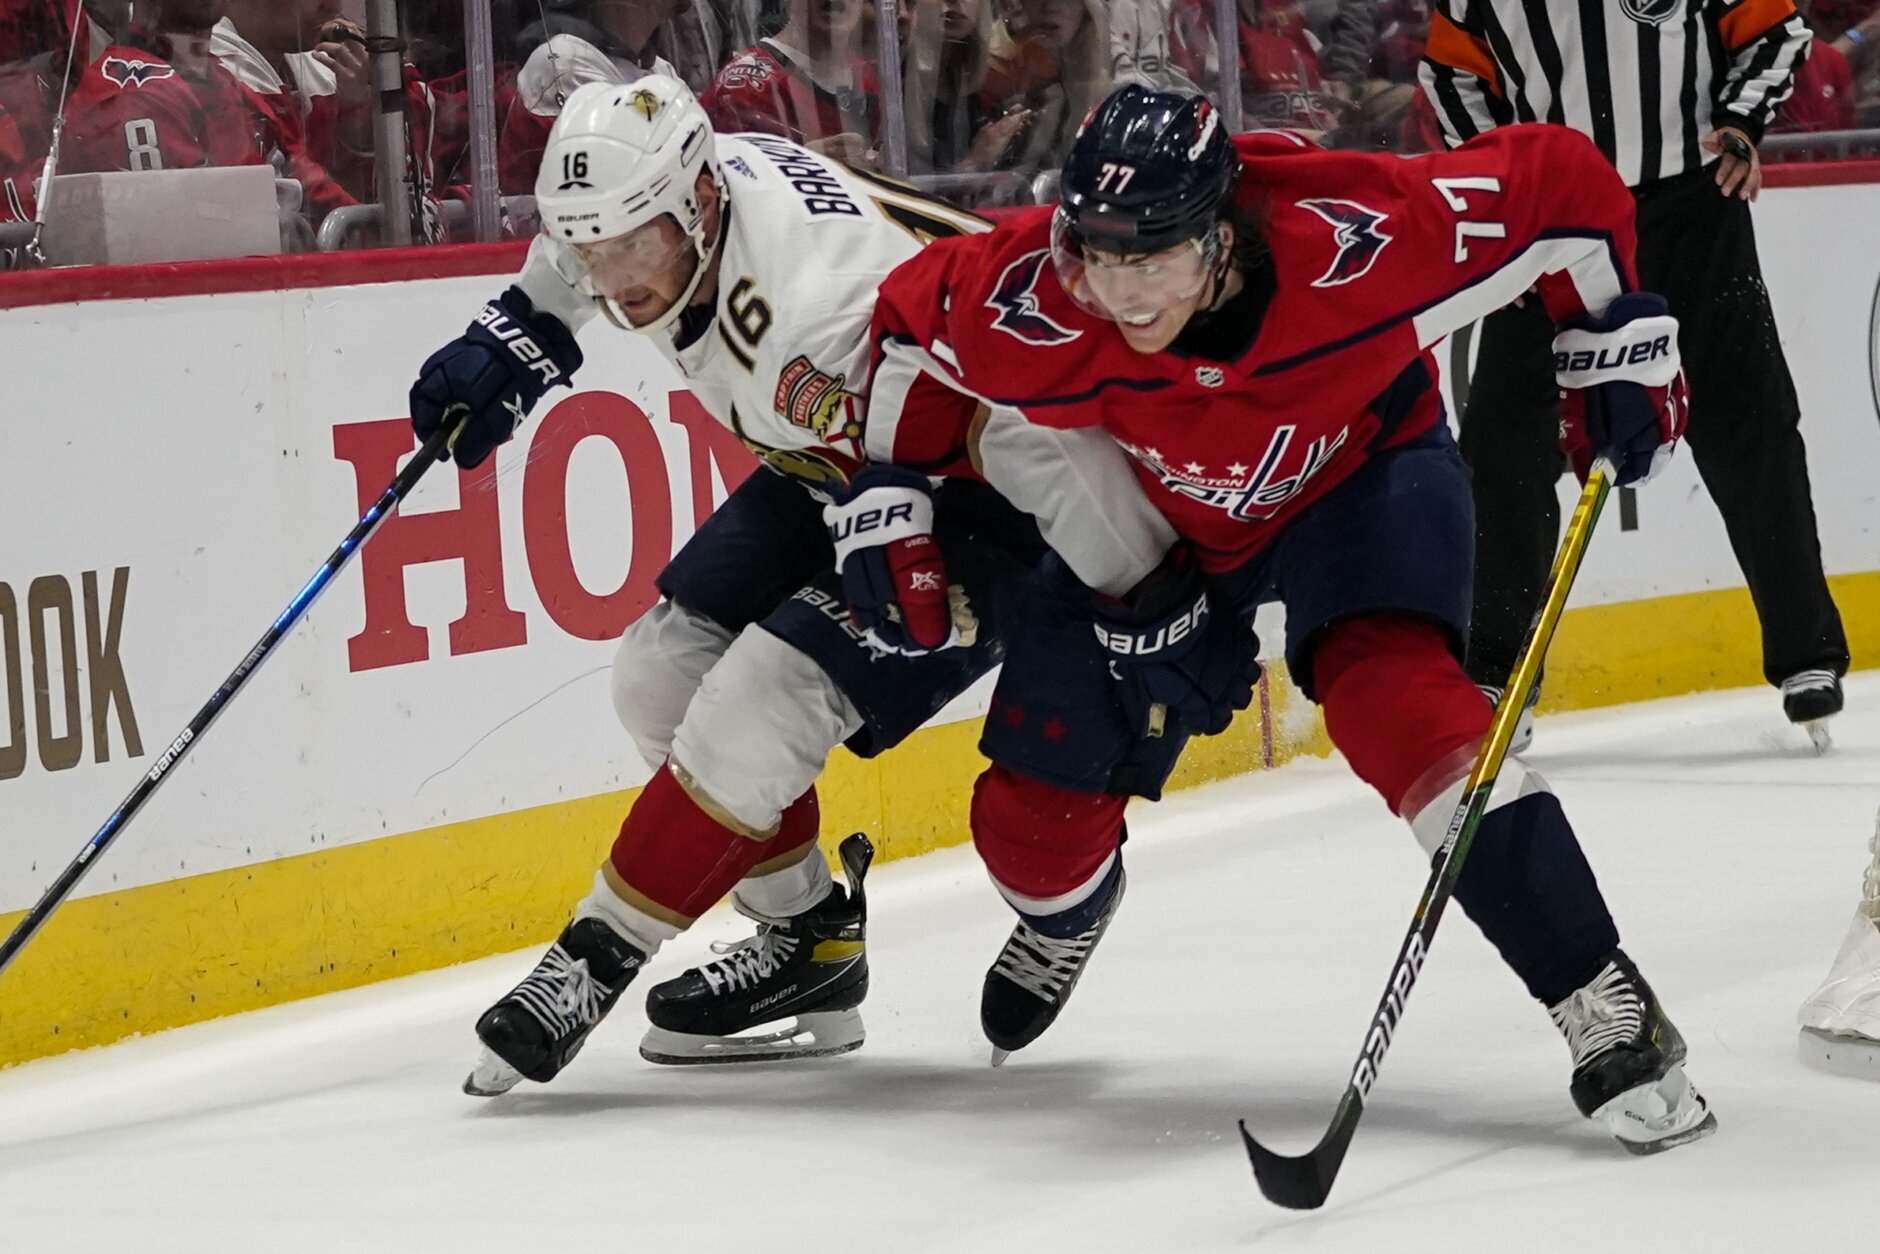 Panthers beat Caps in OT, win series for 1st time since '96